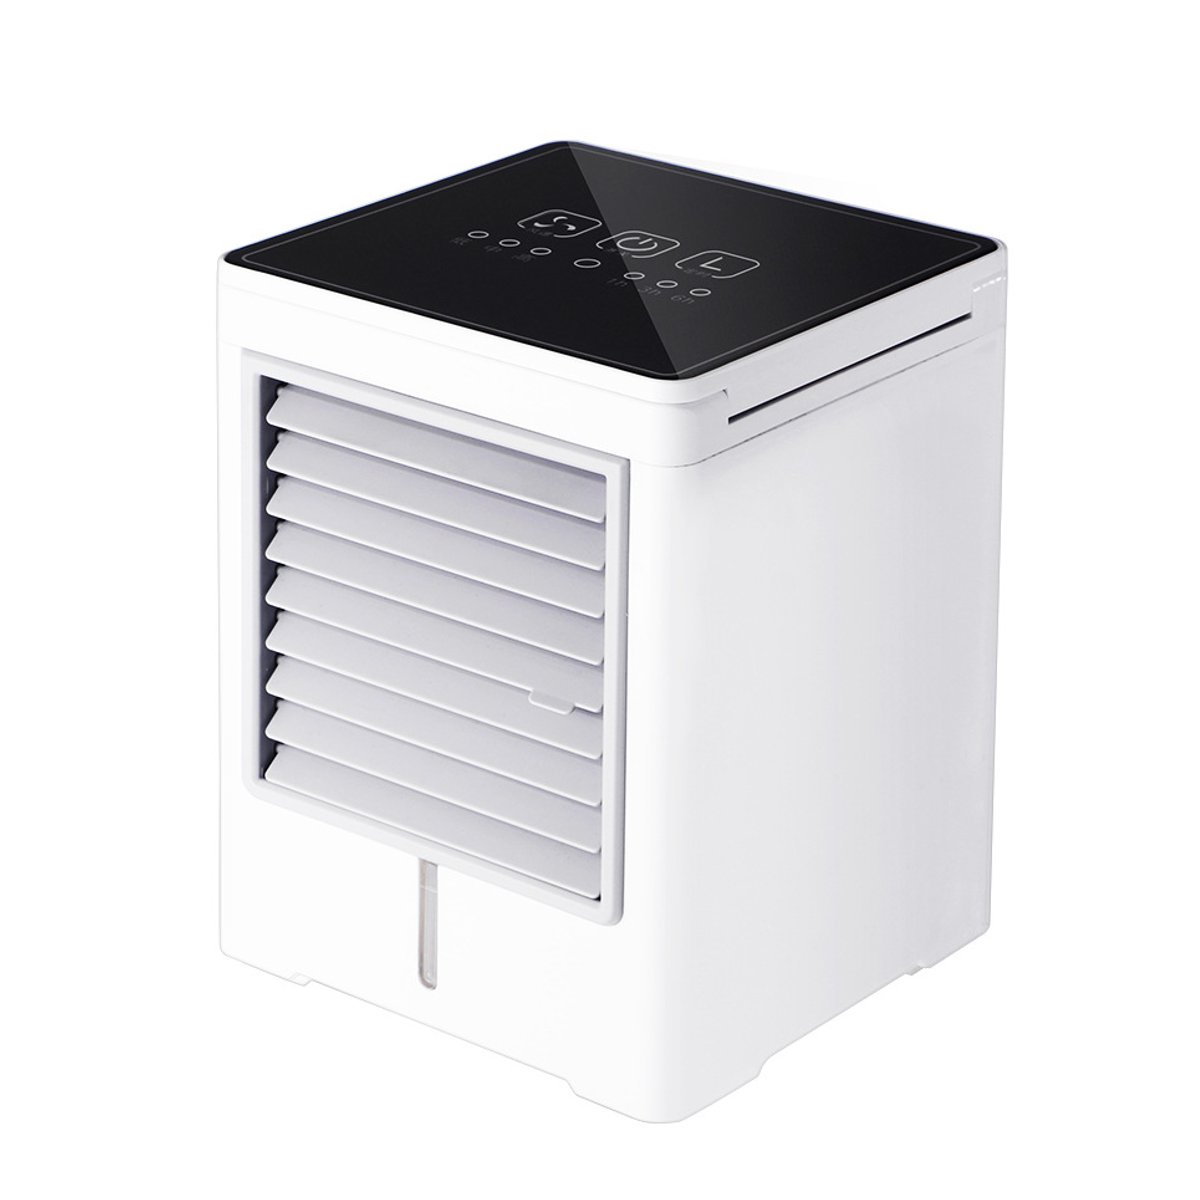 

Mini Air Conditioner Water Cooling Fan Touch Screen Timing Artic Cooler Humidifier